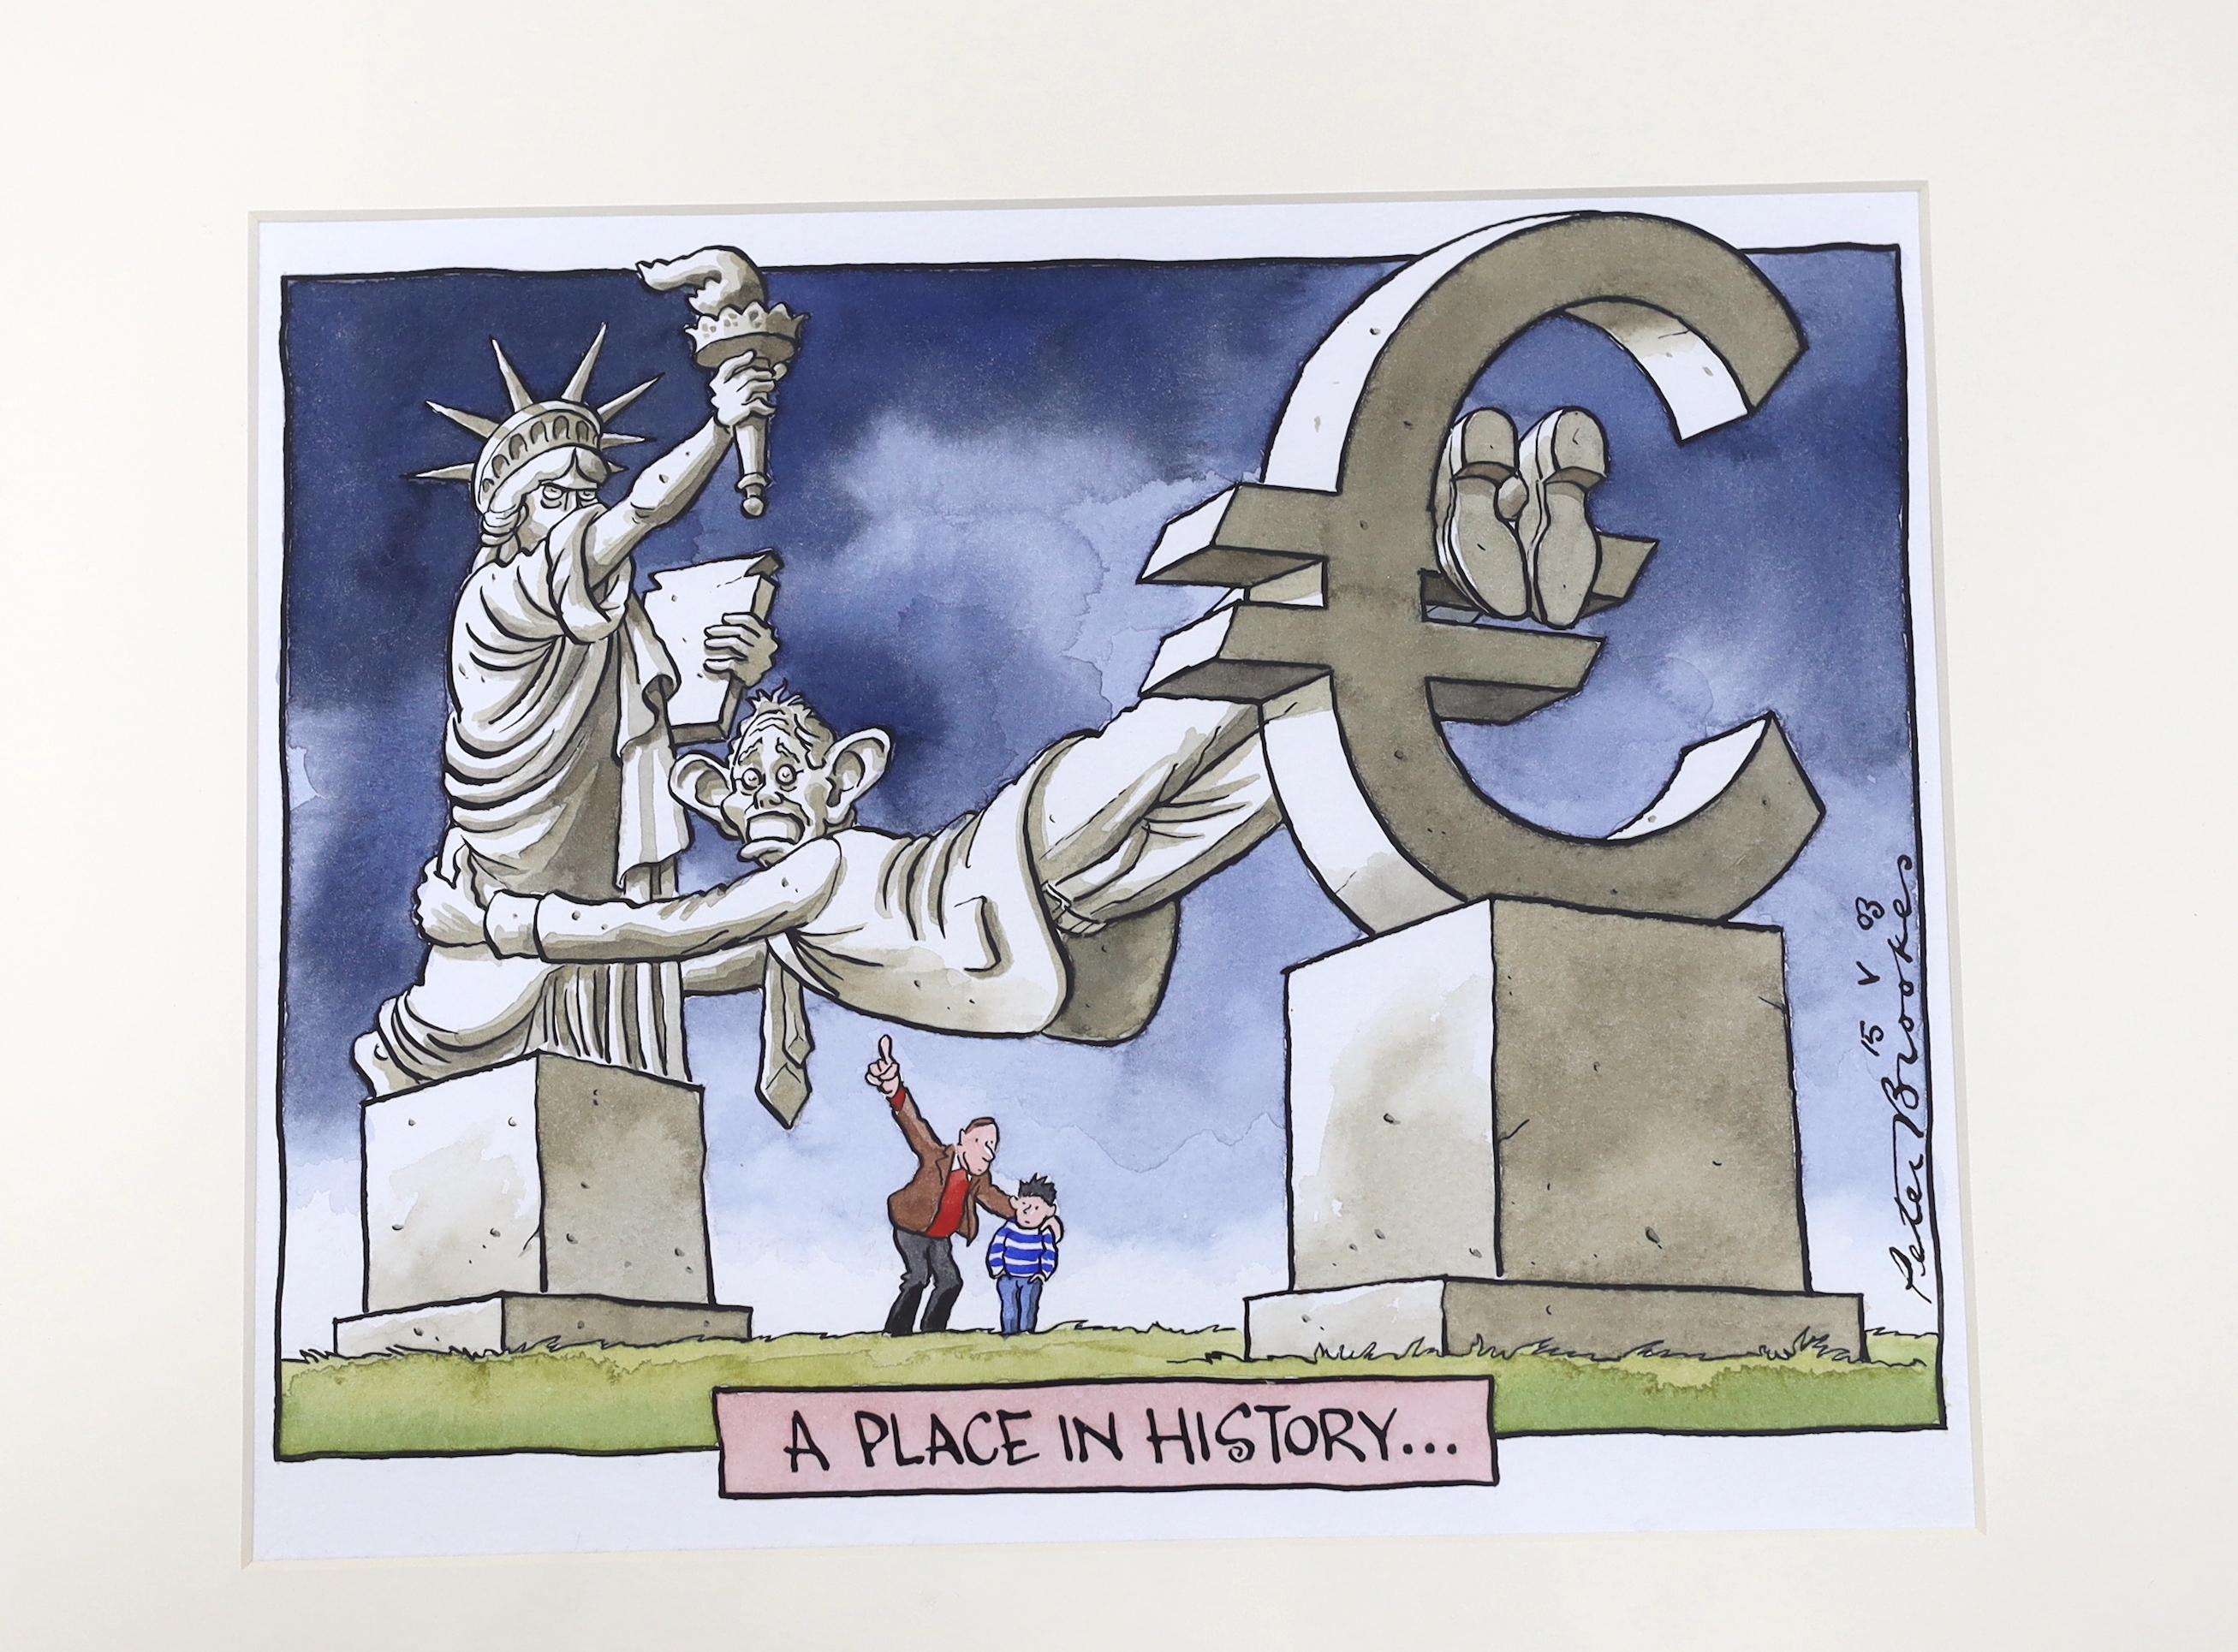 Peter Brookes (b.1943), pen, ink and watercolour satirical cartoon, 'A Place in History', signed, inscribed and dated 15 v 03, details verso, 24 x 30cm